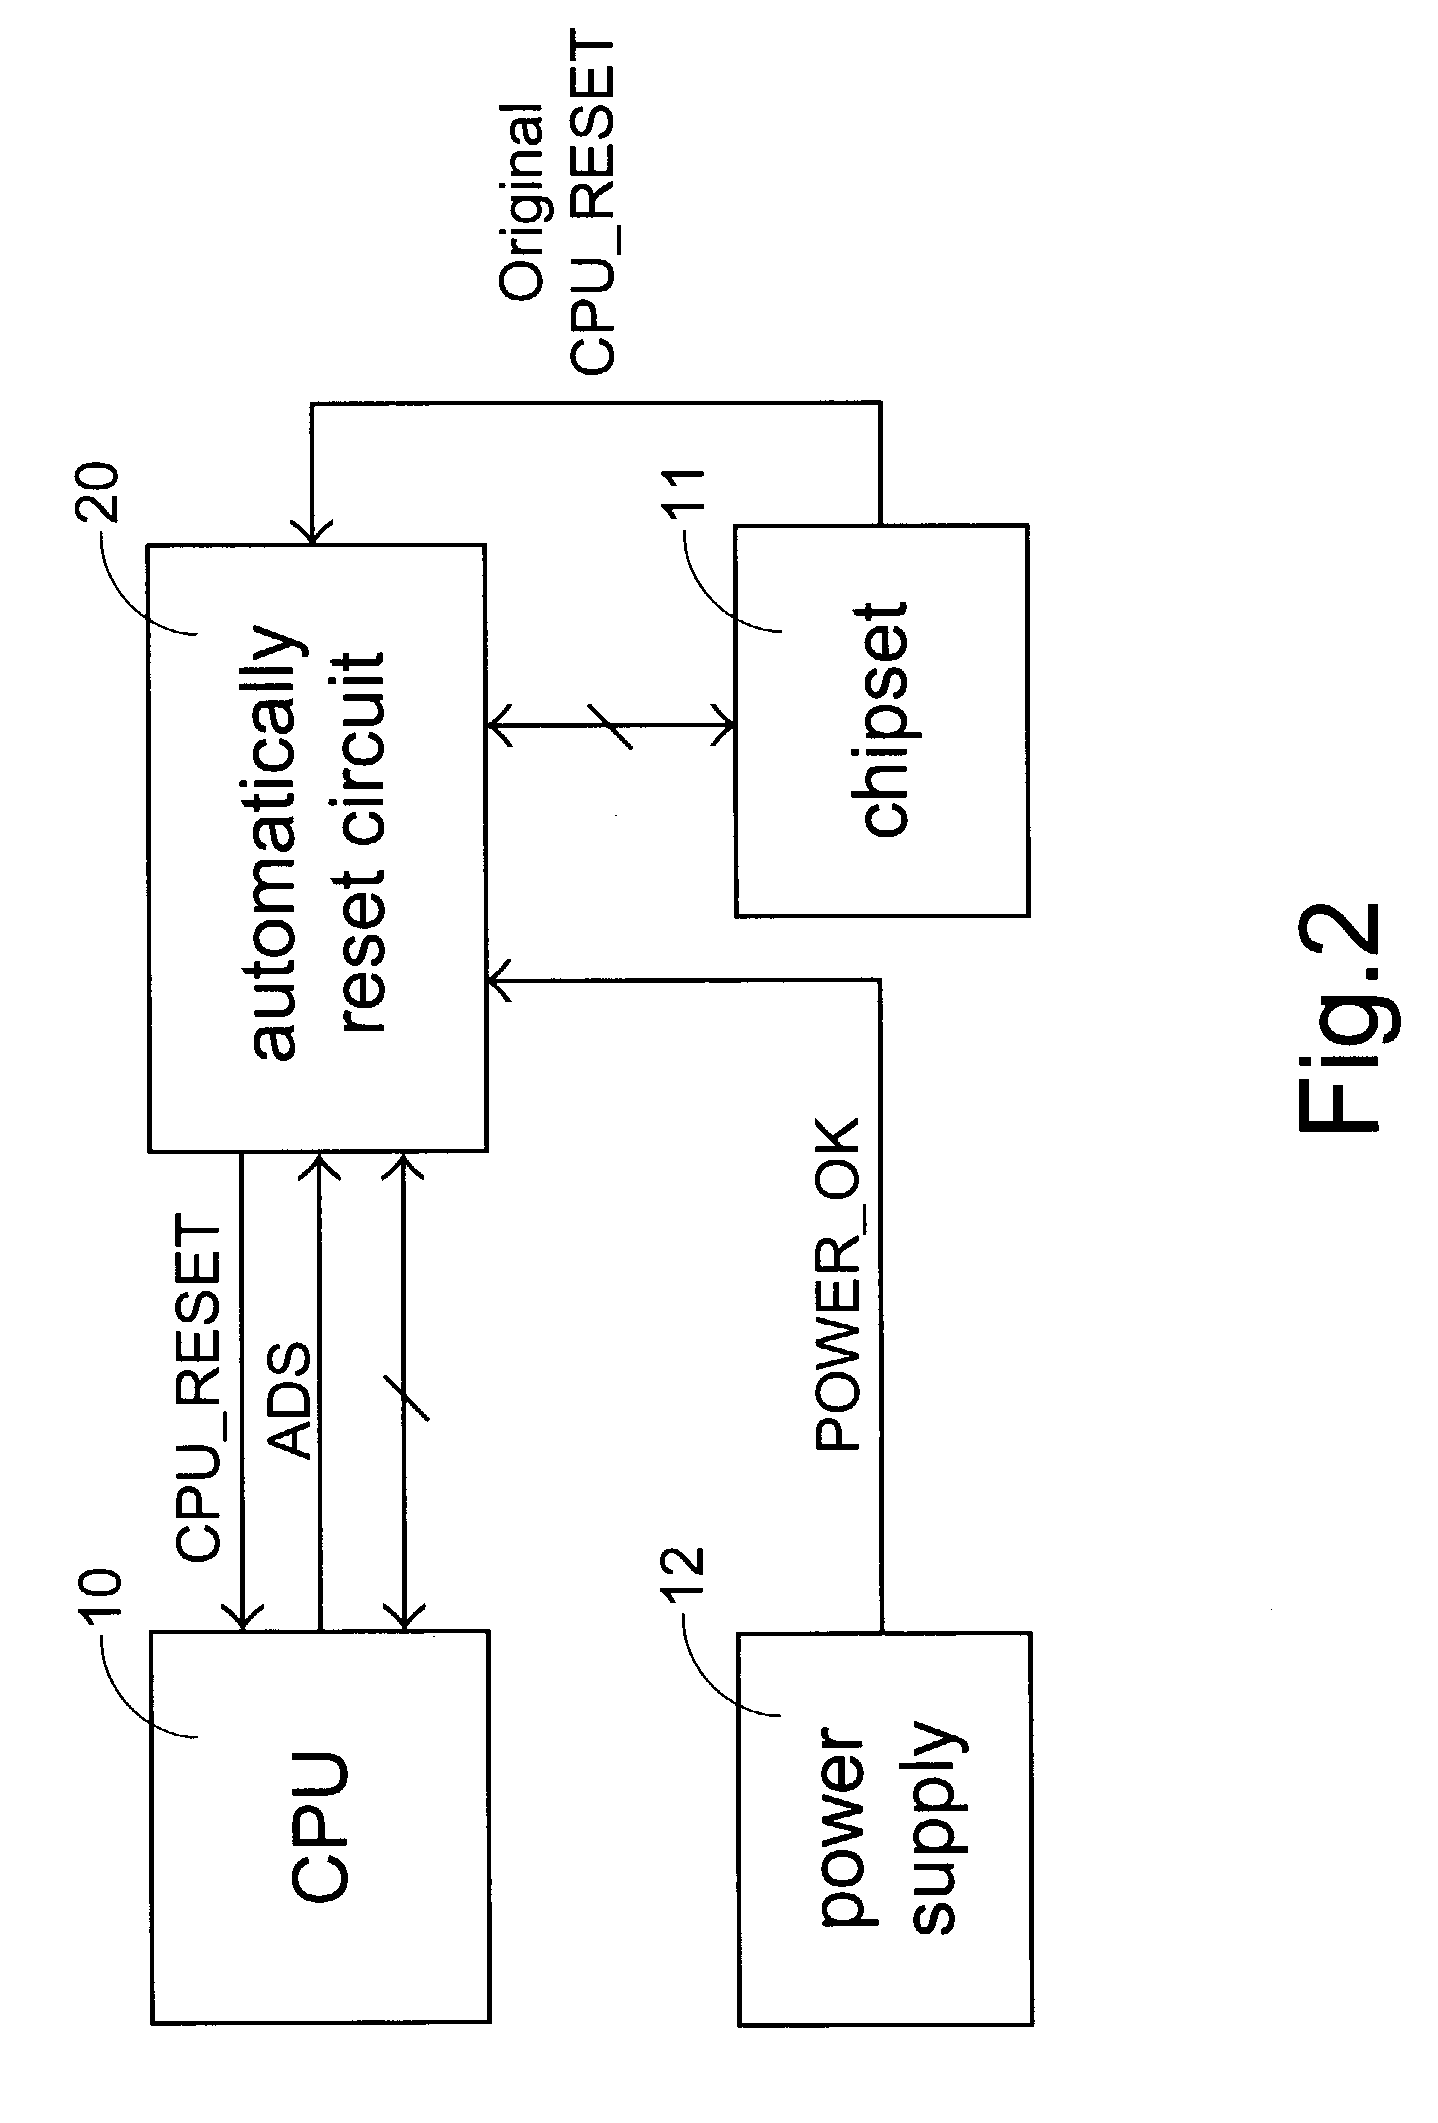 Automatic reset signal generator integrated into chipset and chipset with reset completion indication function